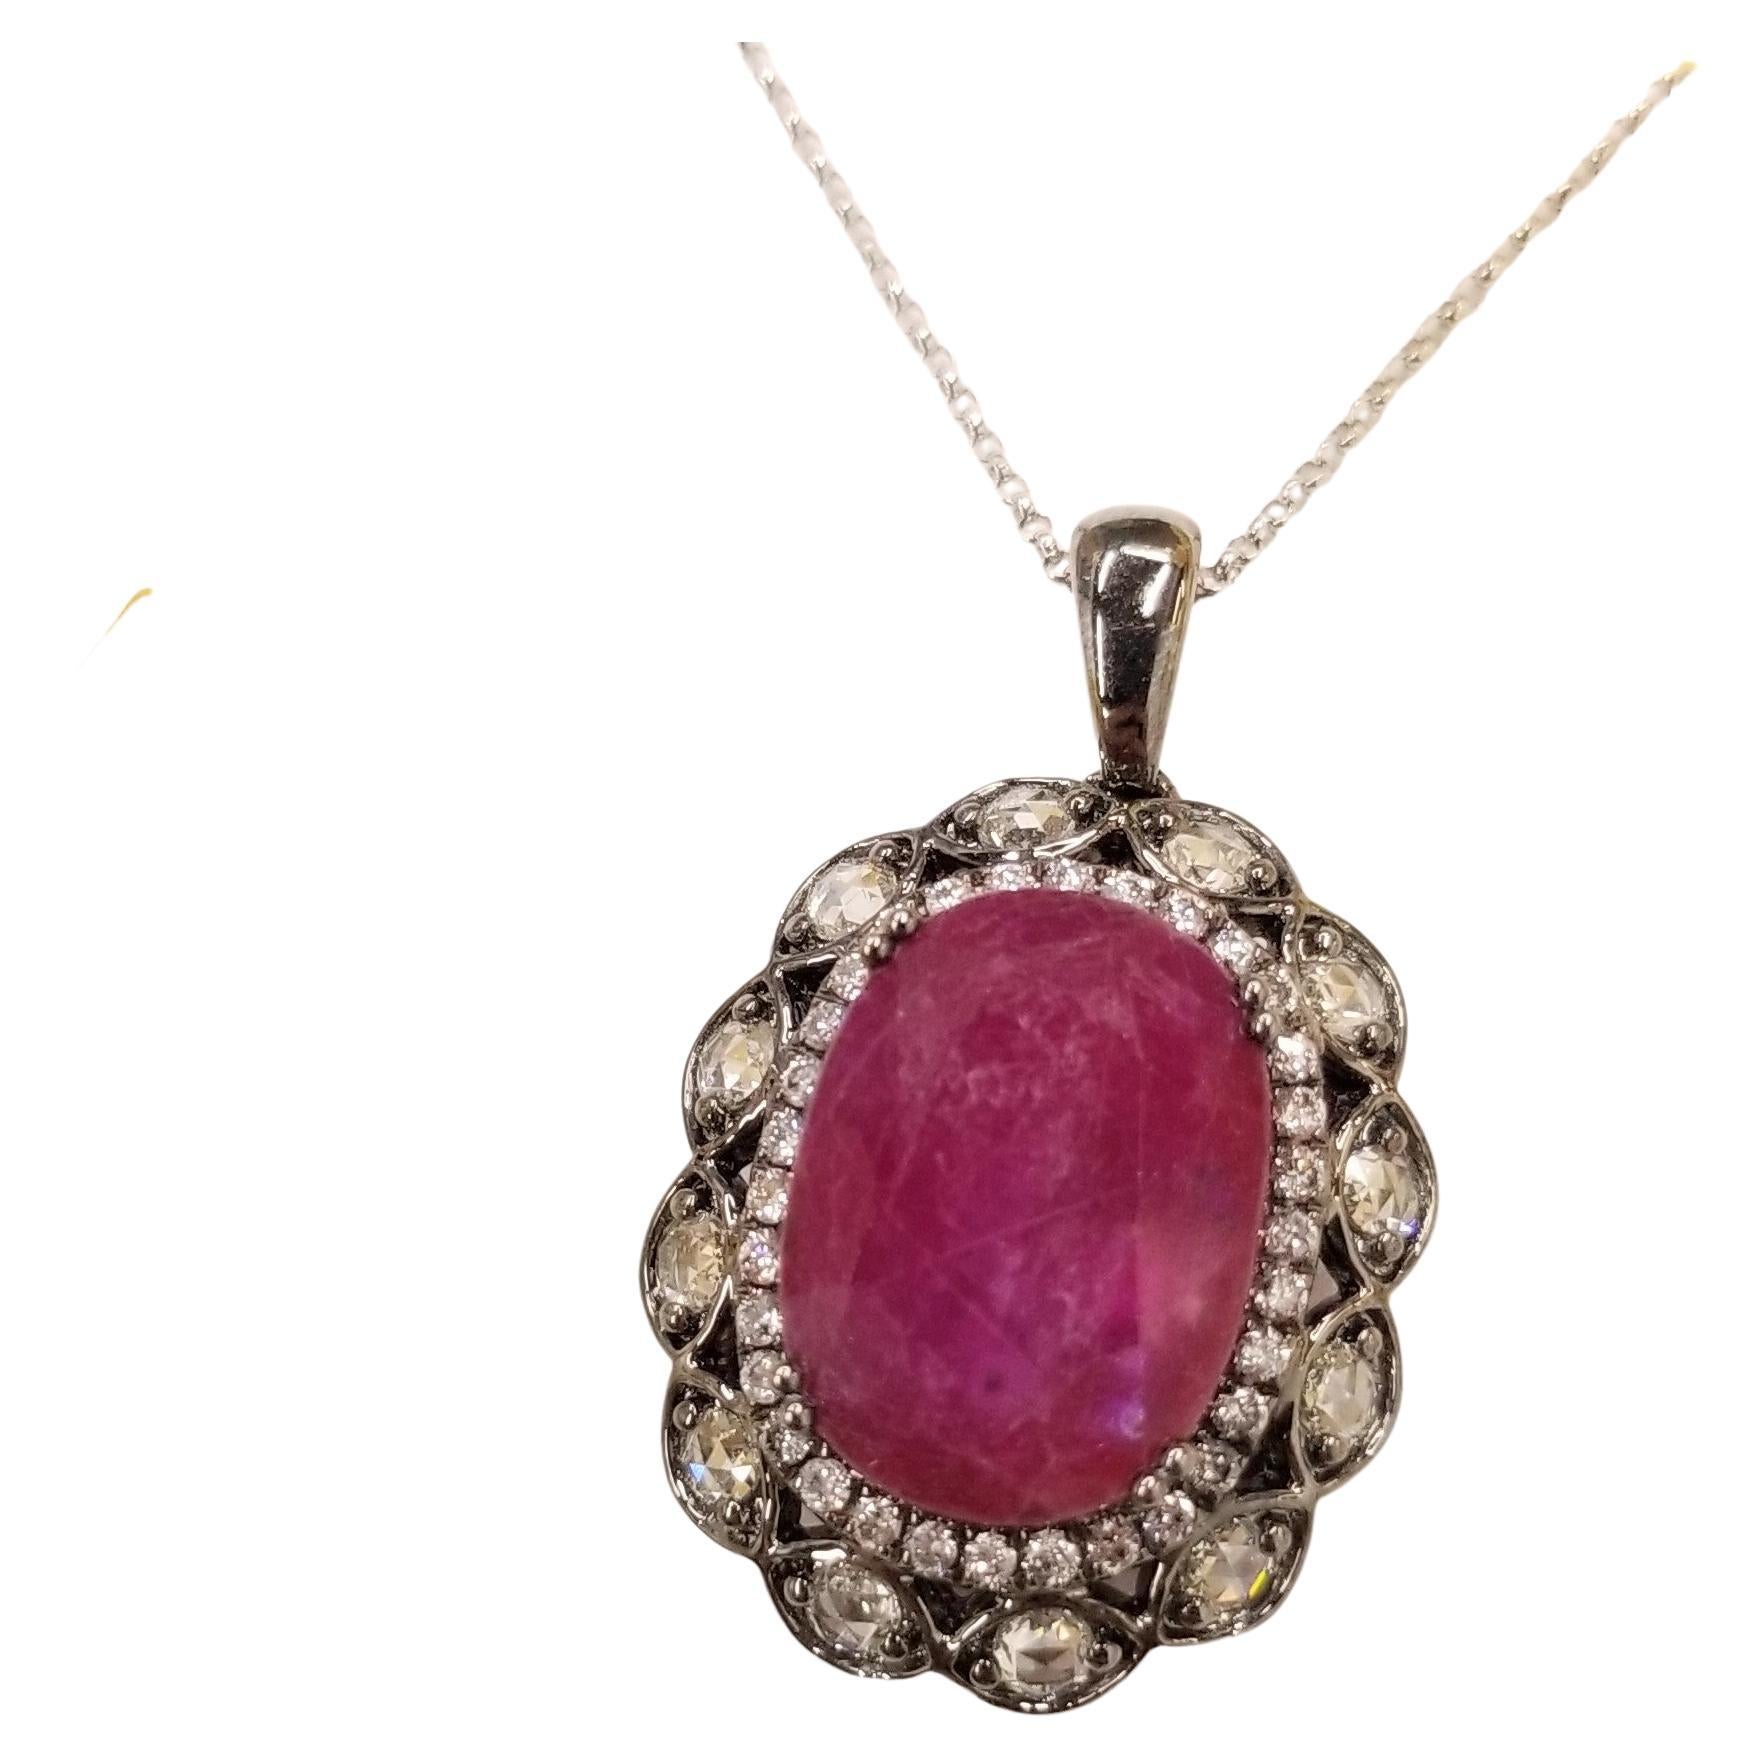 Collectible unique black gold ruby pendent.
The ruby weighs an impressive 10.30carat and has a beautiful oval shape along with an deep purlish-red color that makes it so special. It is complemented by 1.11  carats of round brilliant-cut & rose-cut